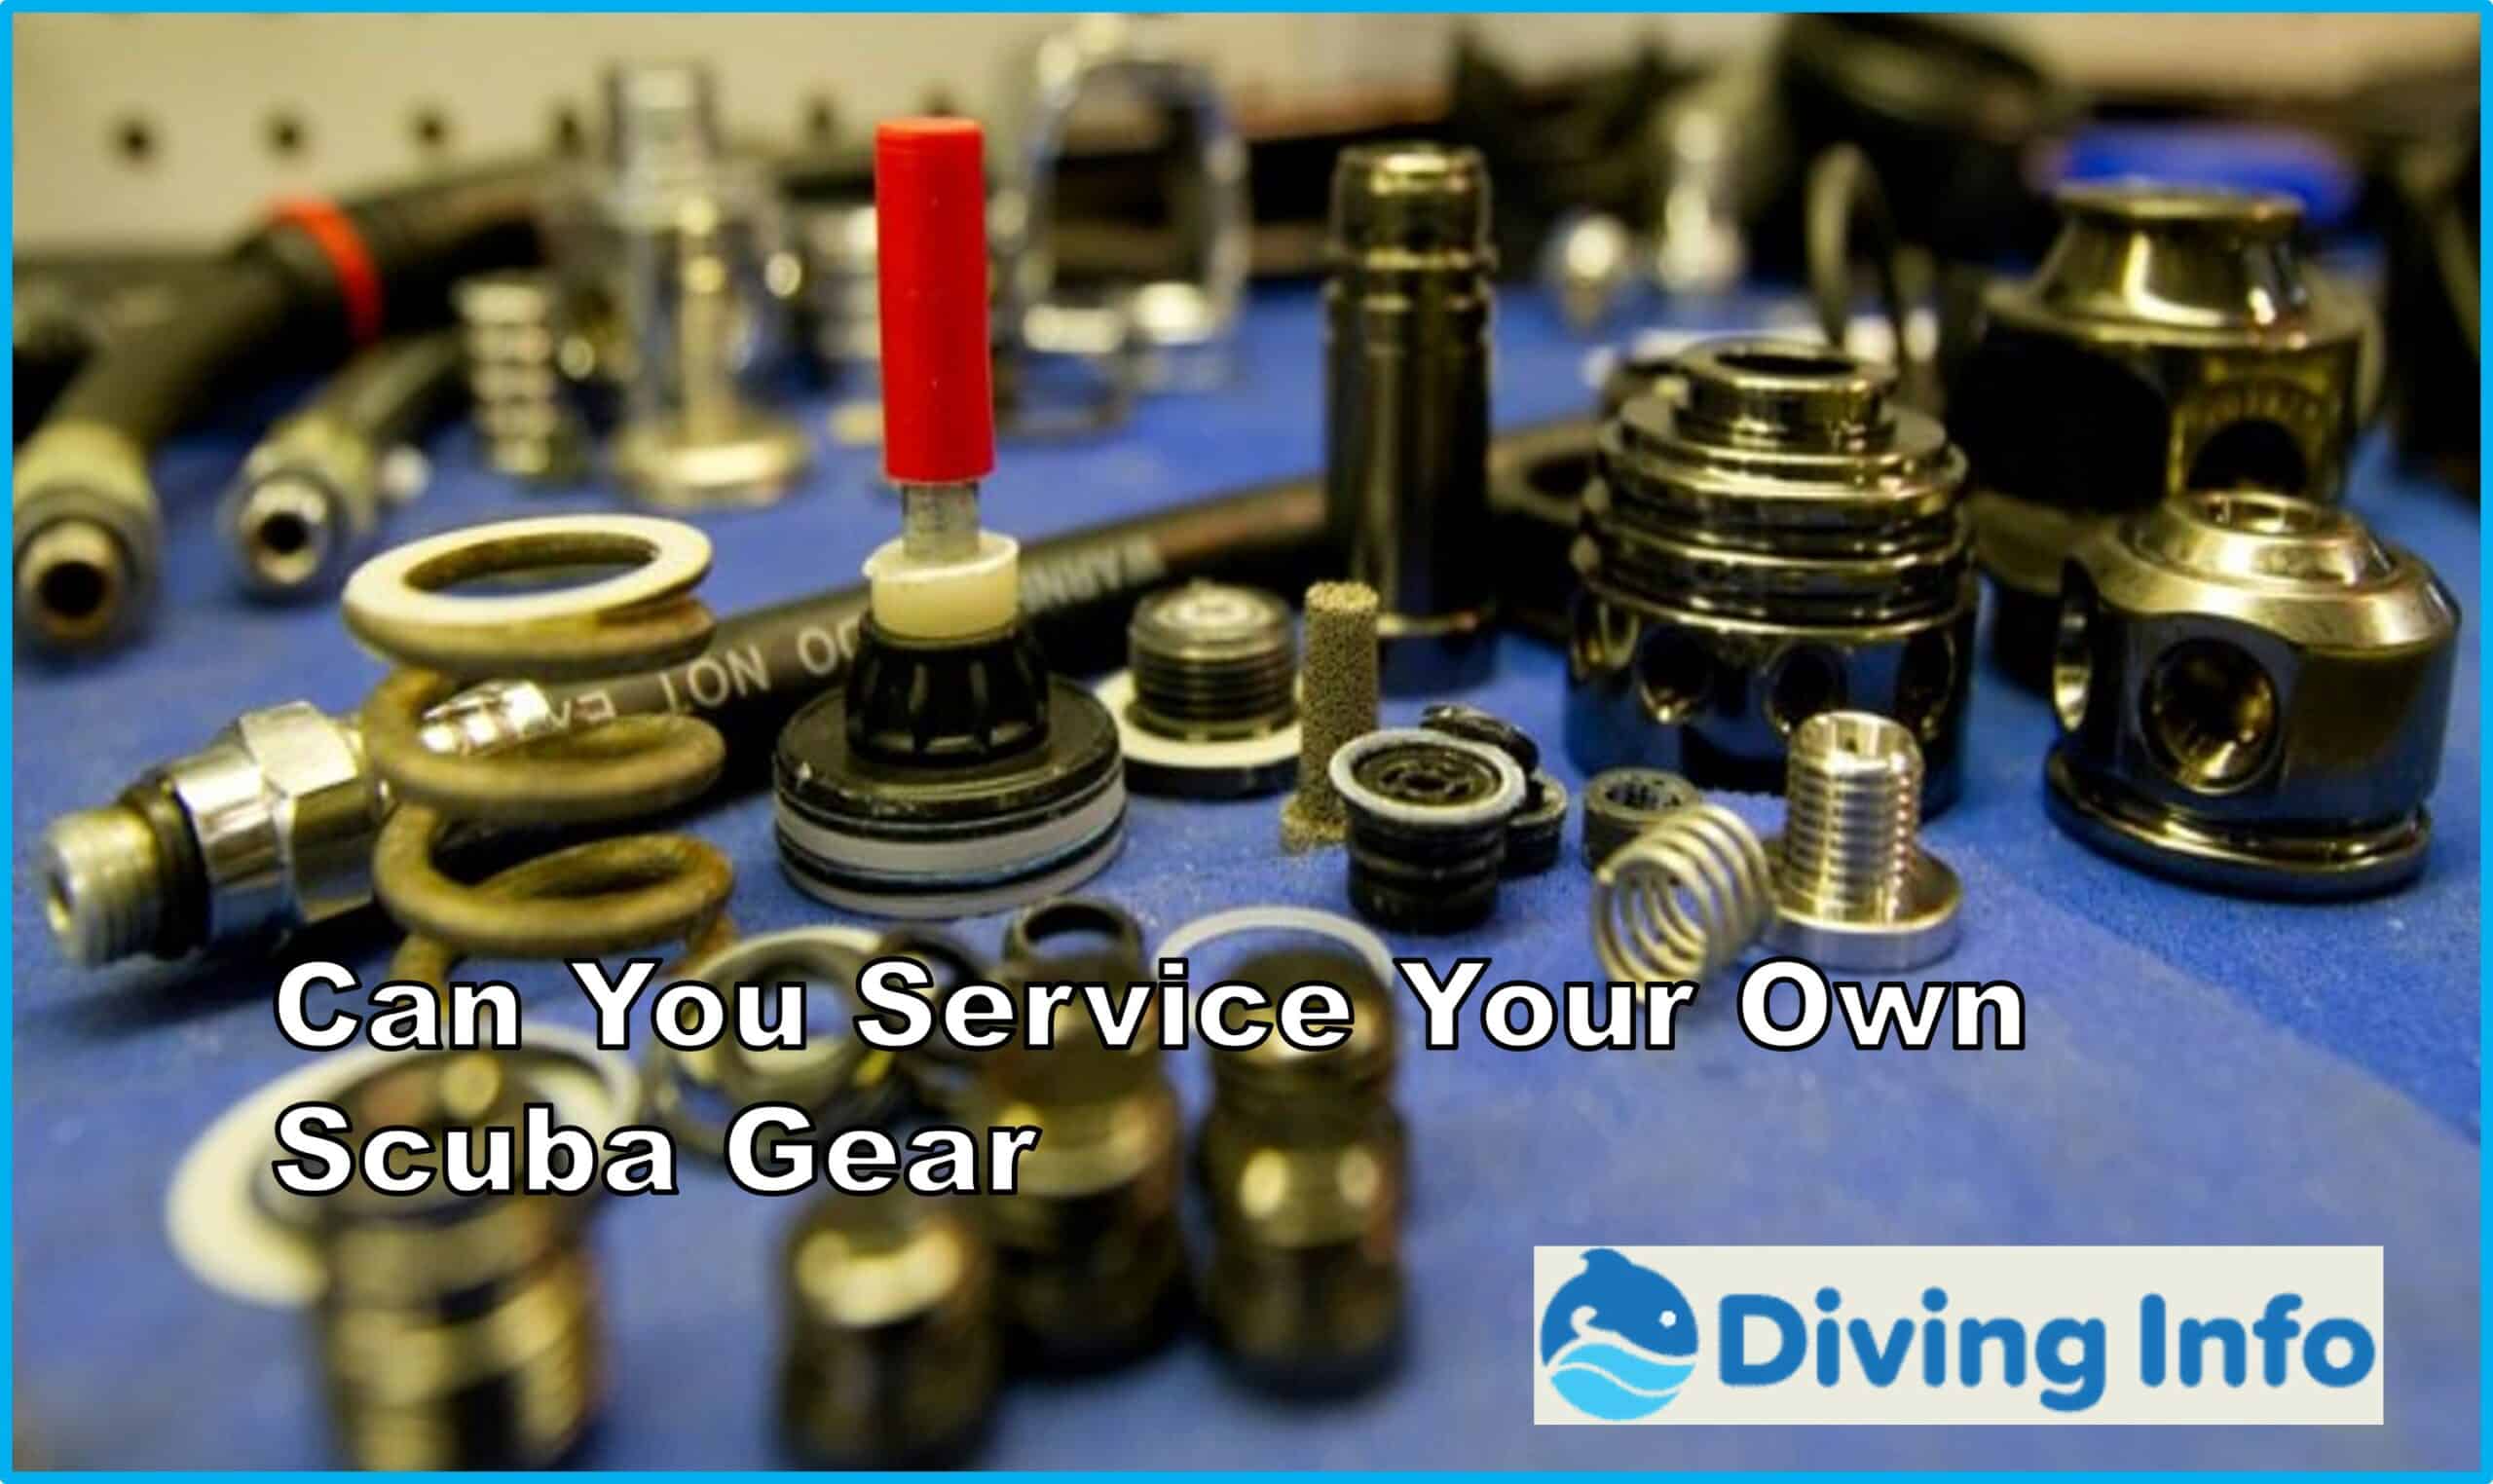 Can You Service Your Own Scuba Gear